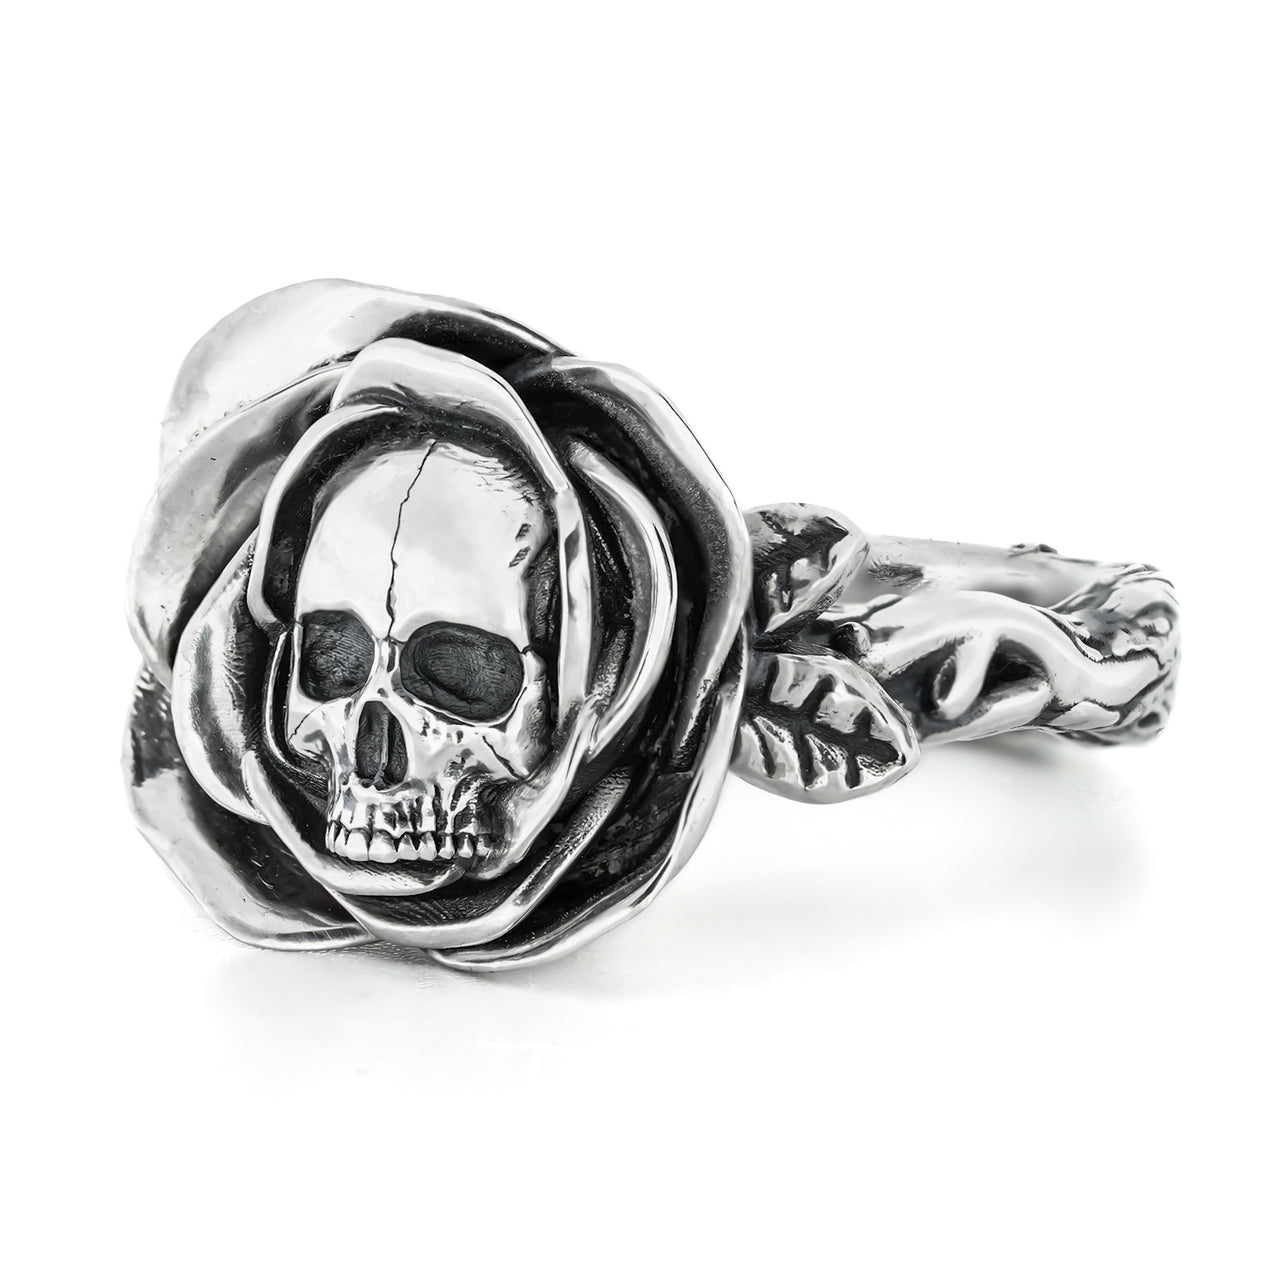 Skull and rose ring in sterling silver - handmade - Black Feather Design